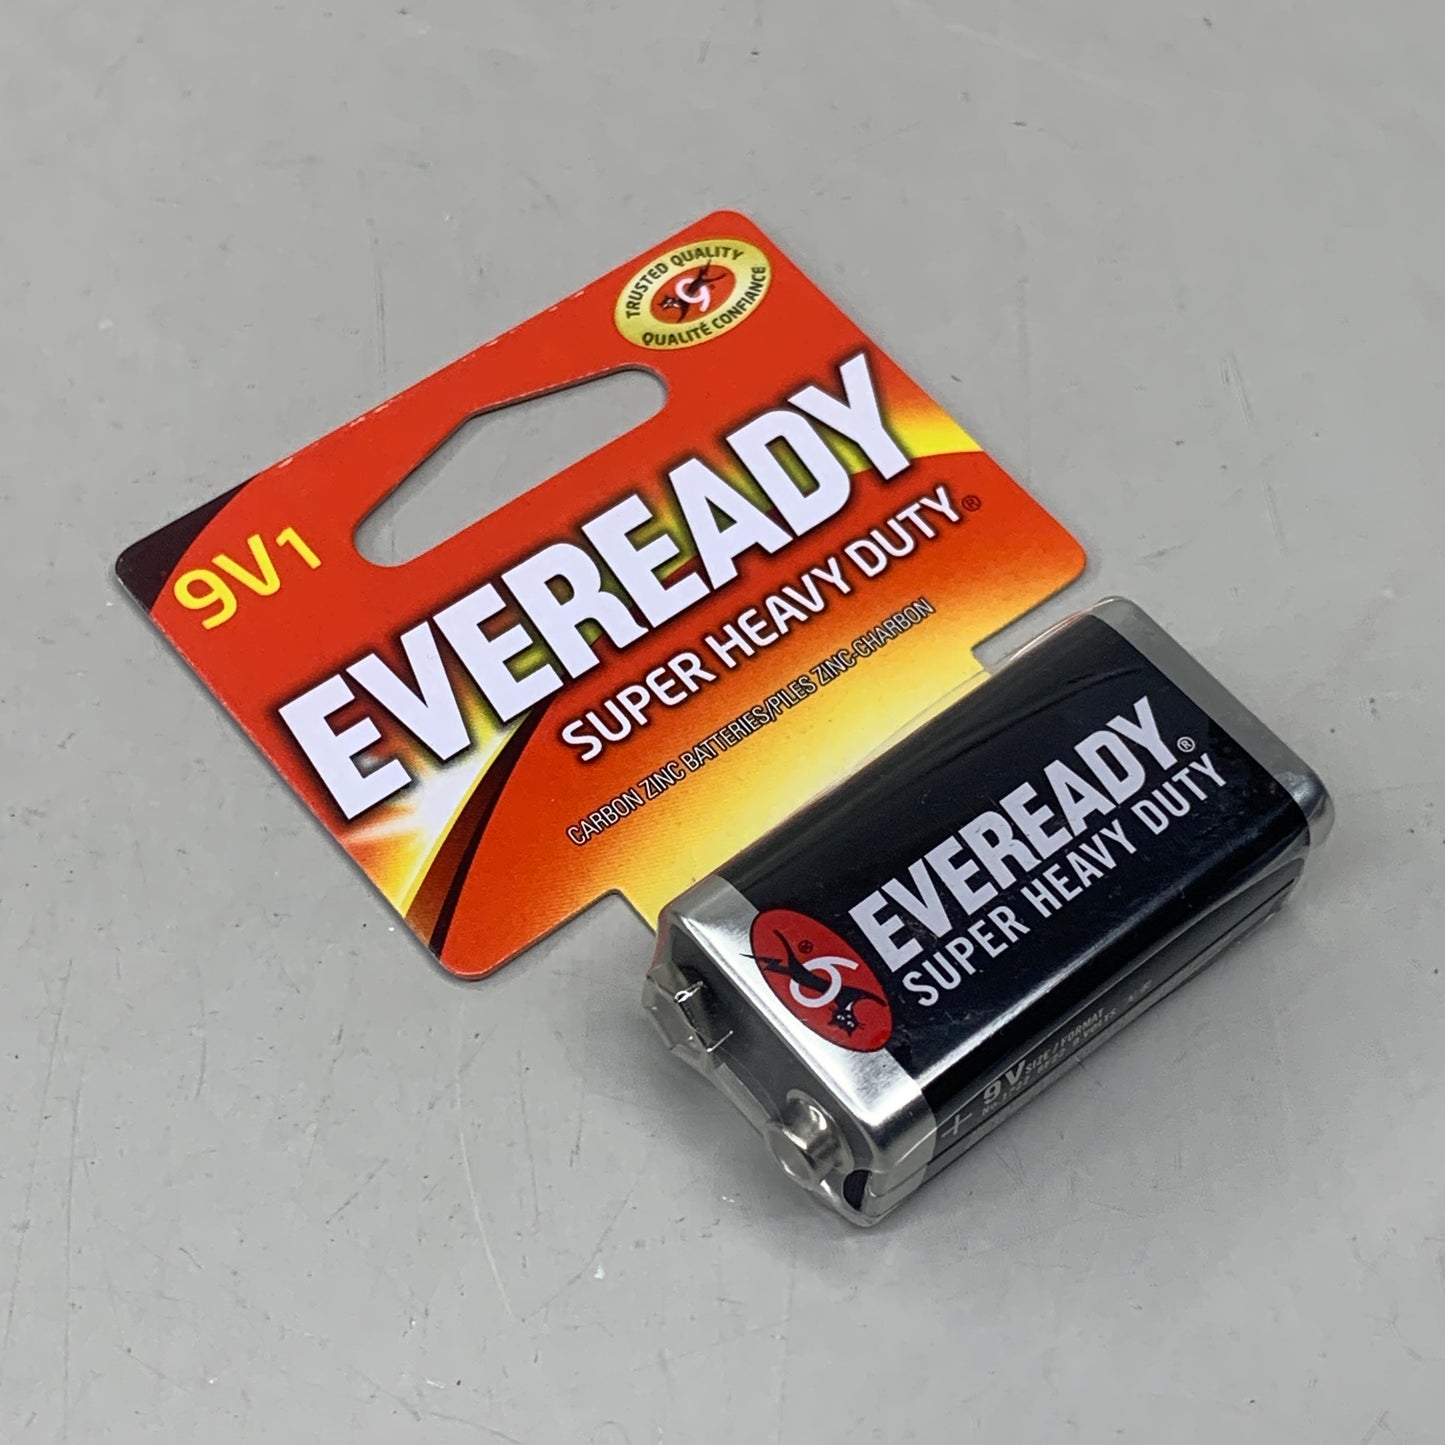 EVEREADY (18 PACK) Super Heavy Duty 9 Volt Battery 1222SW